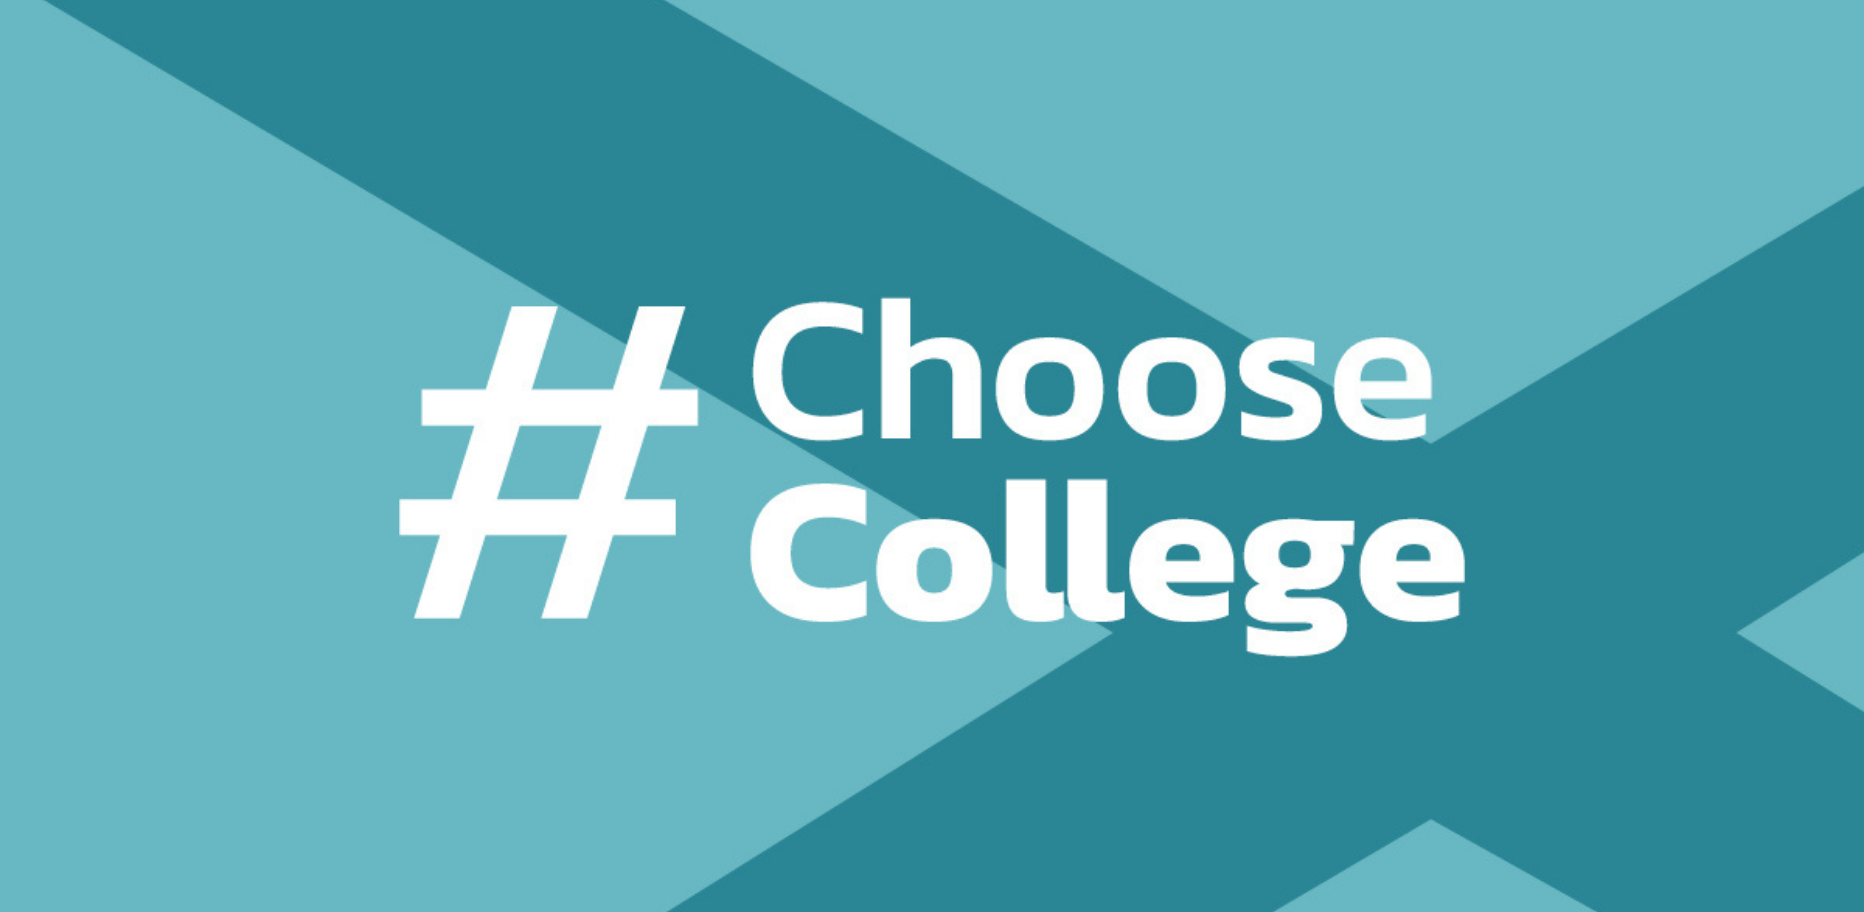 Choose College: Is it time to change your career?